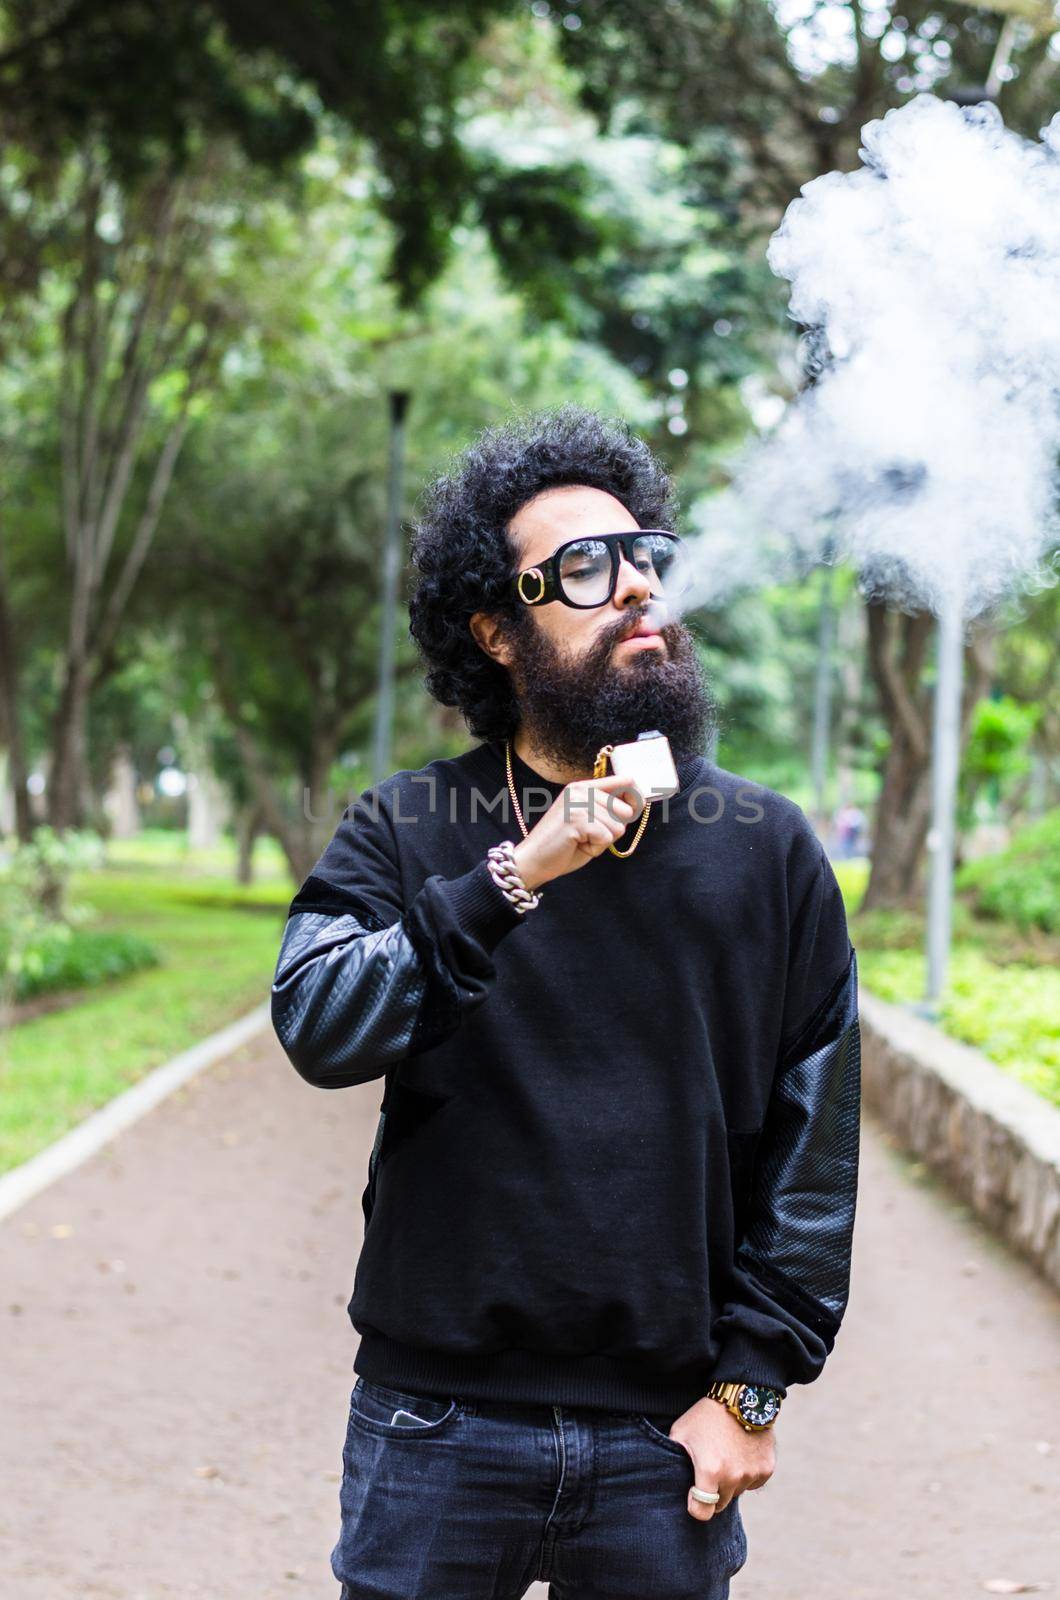 Vape. Young brutal man with large beard and fashionable haircut in sunglasses smoking an electronic cigarette in the city park. by Peruphotoart